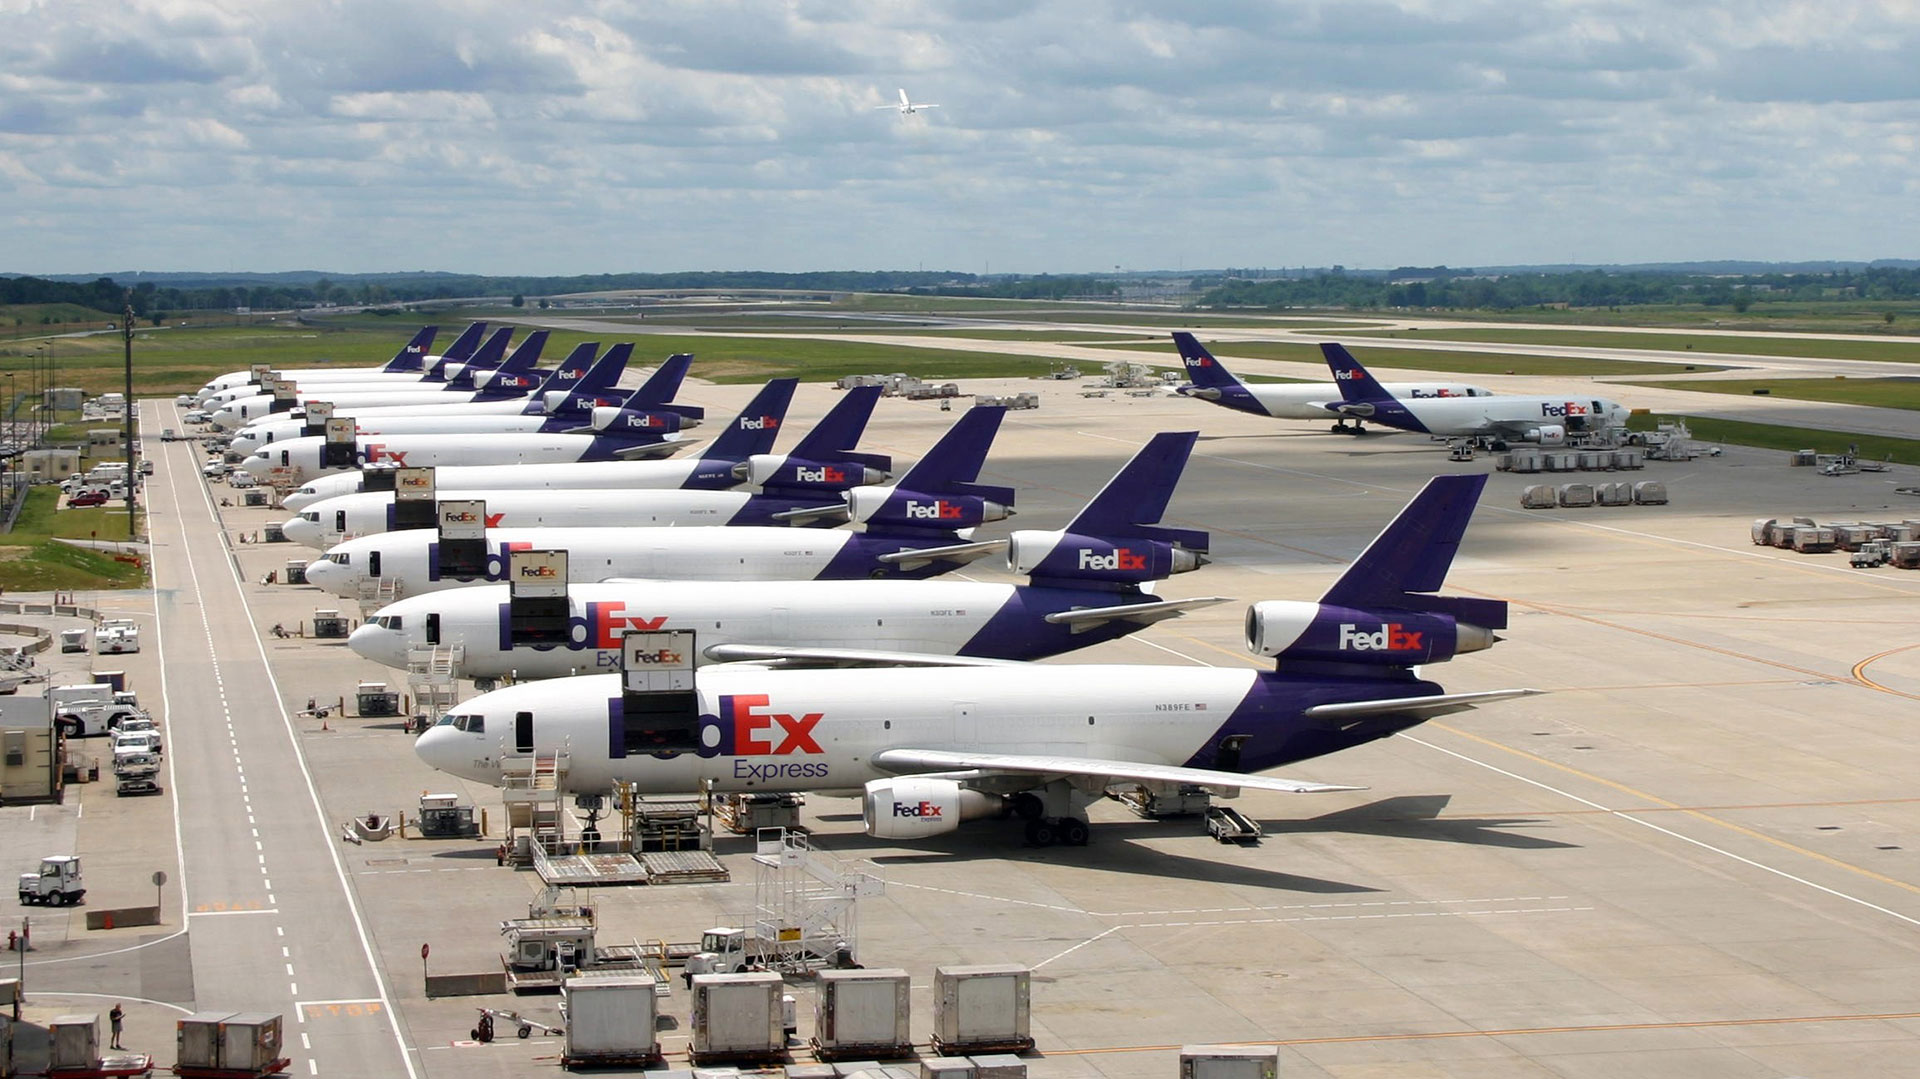 According to Rolf Habben, CEO of Happag Lloyd, the fifth largest shipping company in the world, it is very difficult to compete in air cargo with giants such as FedEx and UPS, which have fleets of hundreds of planes.